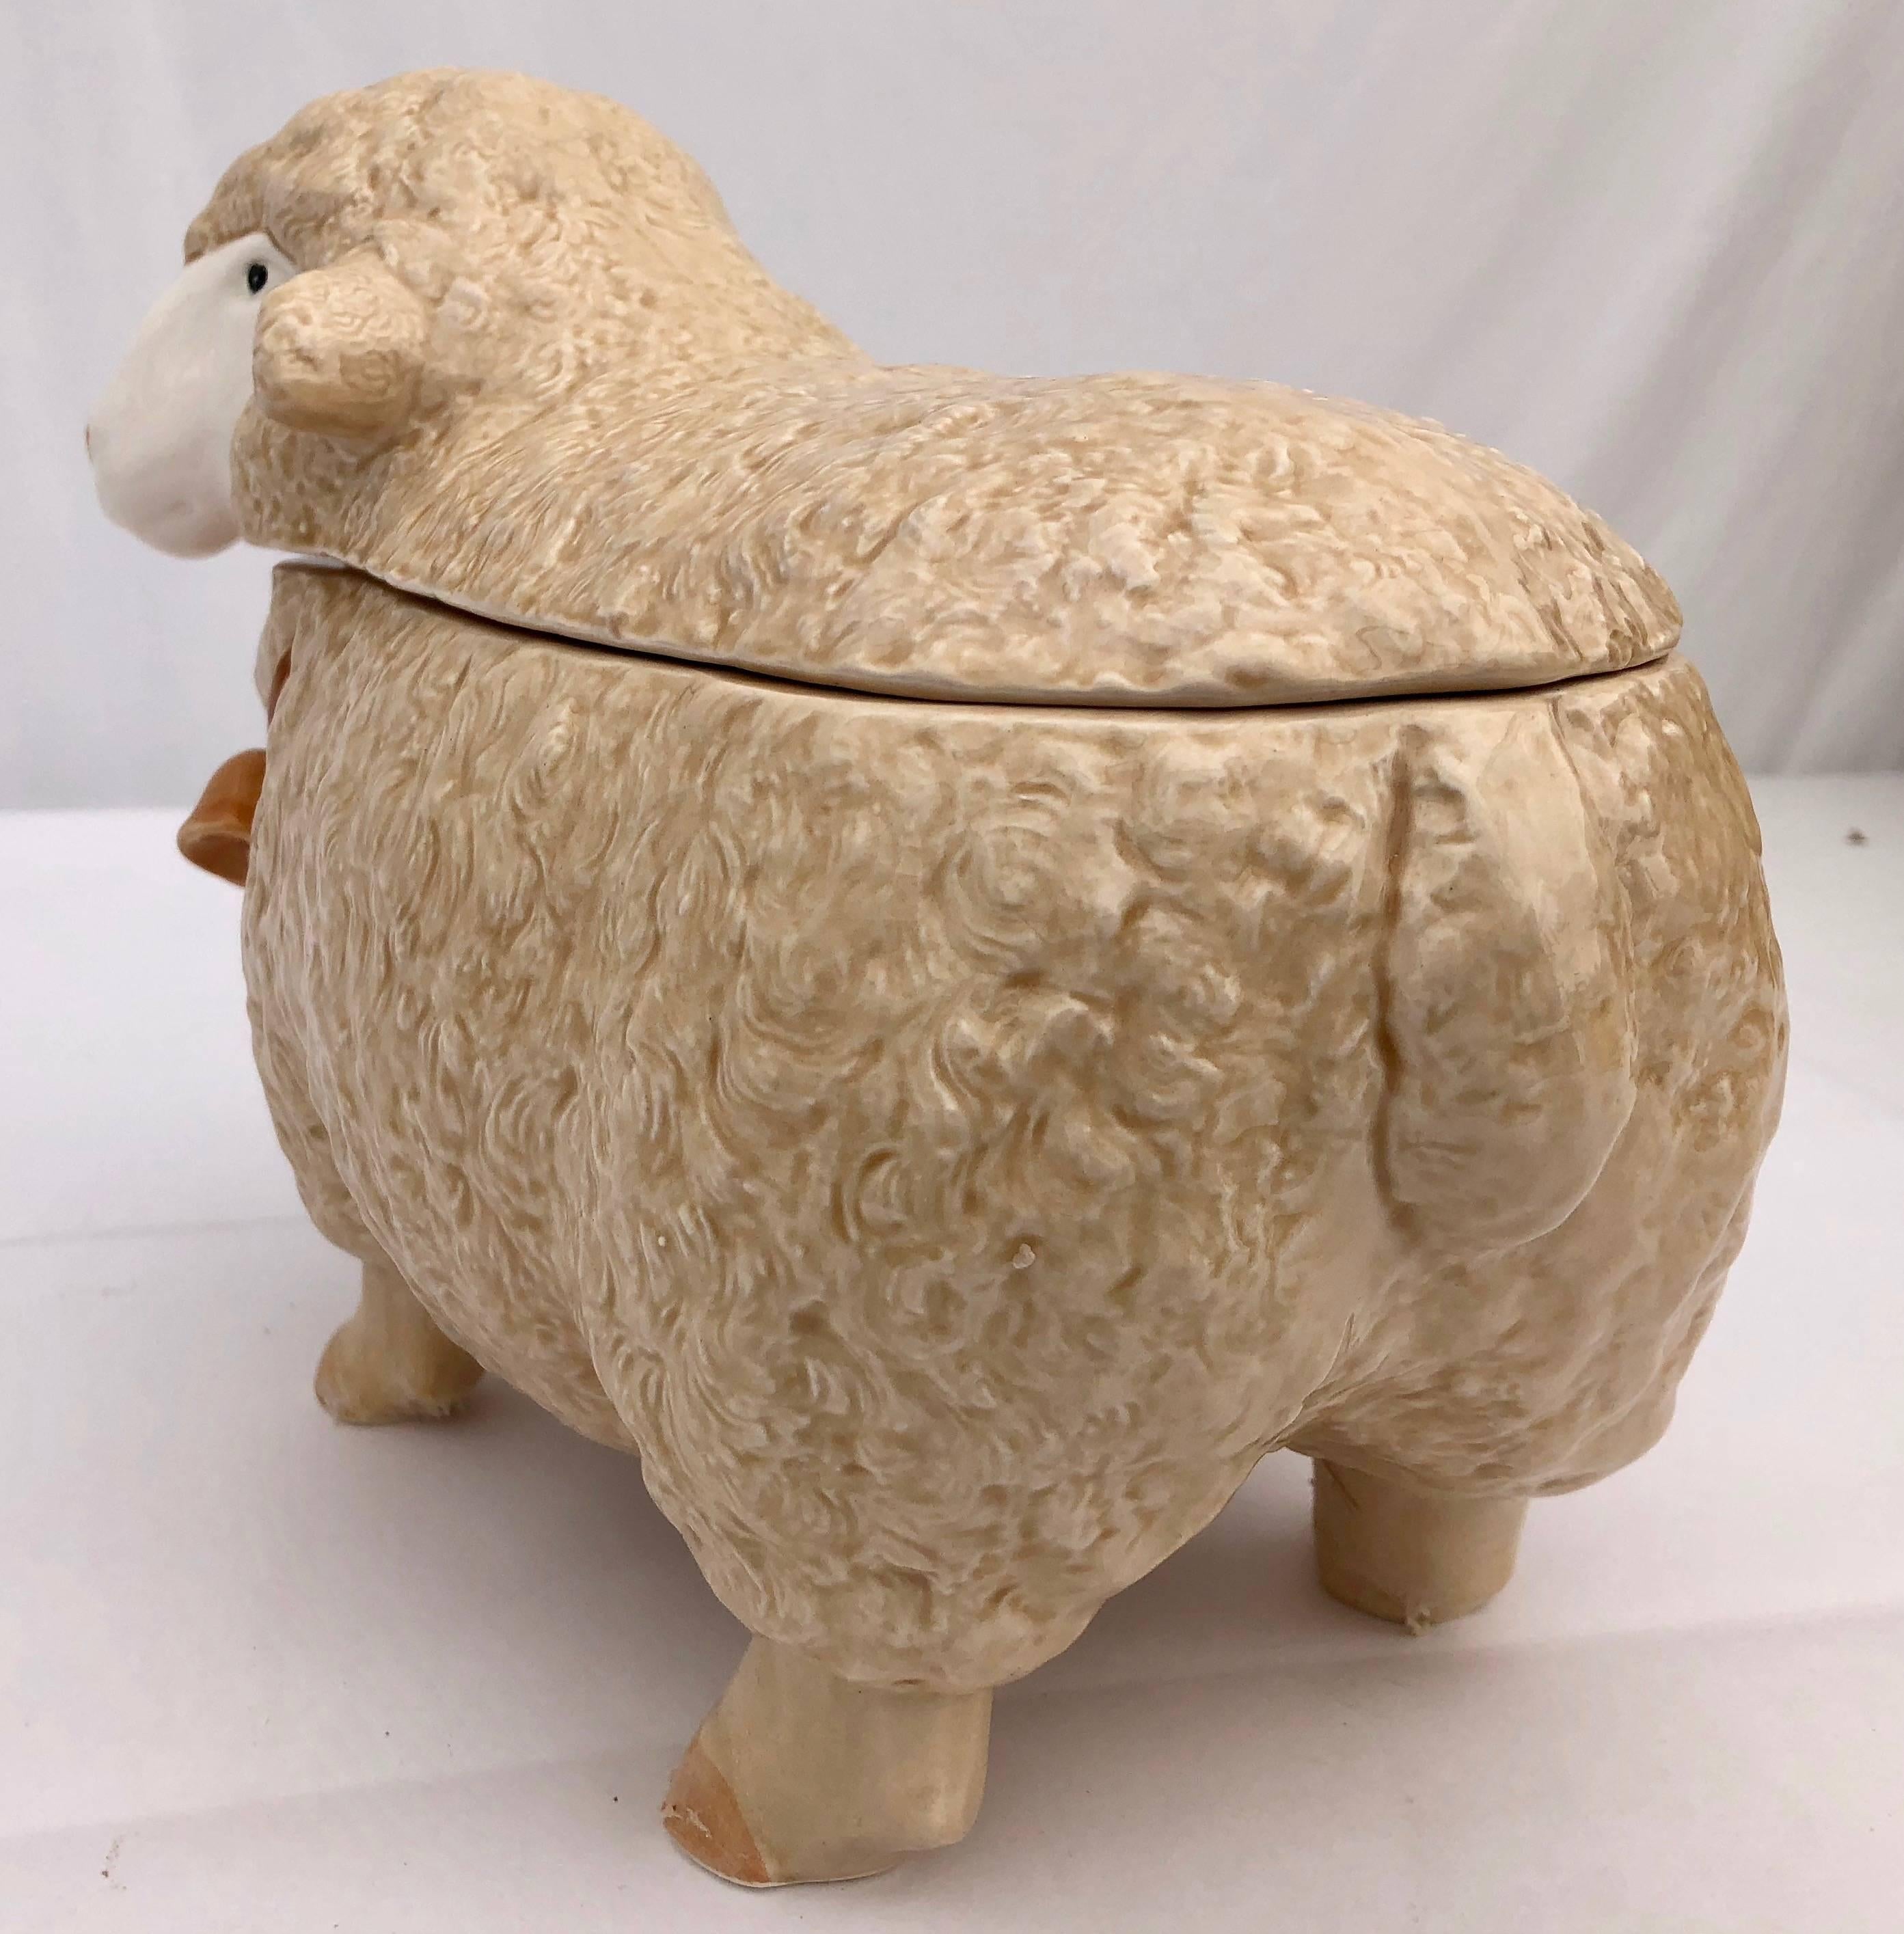 This is a fun sheep ceramic cookie jar handcrafted by Otagiri, Japan, 1984. It was purchased for a French restaurant, but never used. The detail from the face to the feet are great.